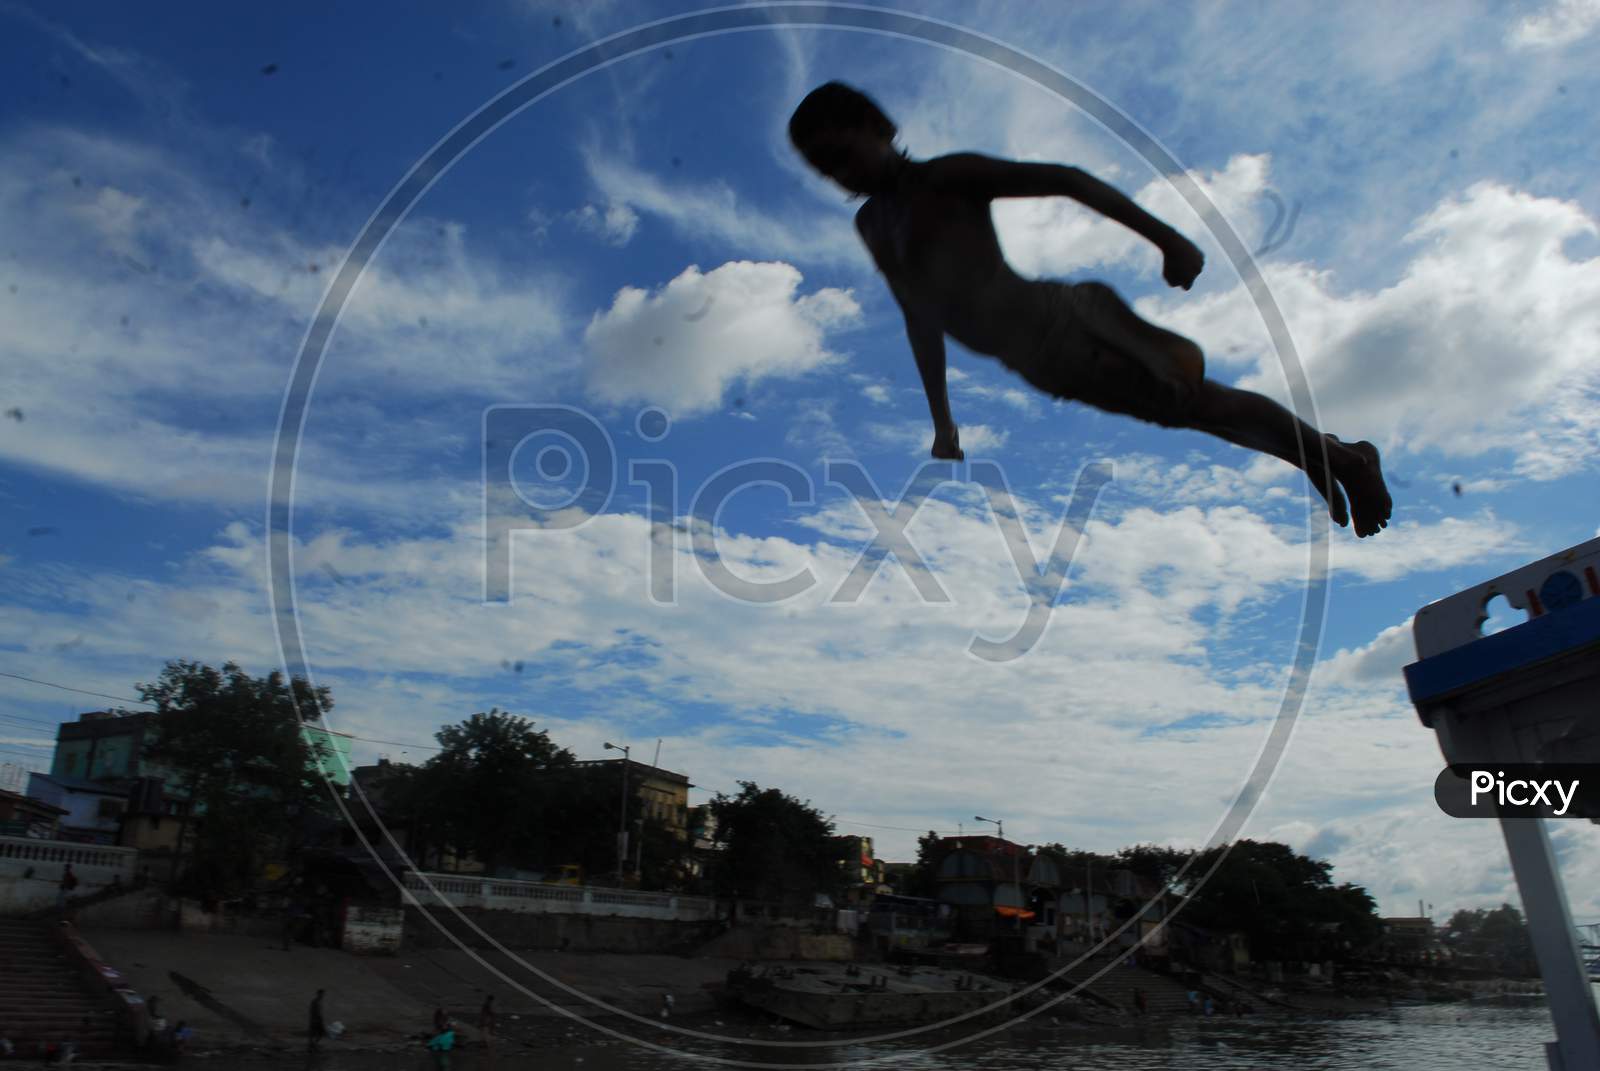 Indian Rural Village Boys Jumping In River And Swimming